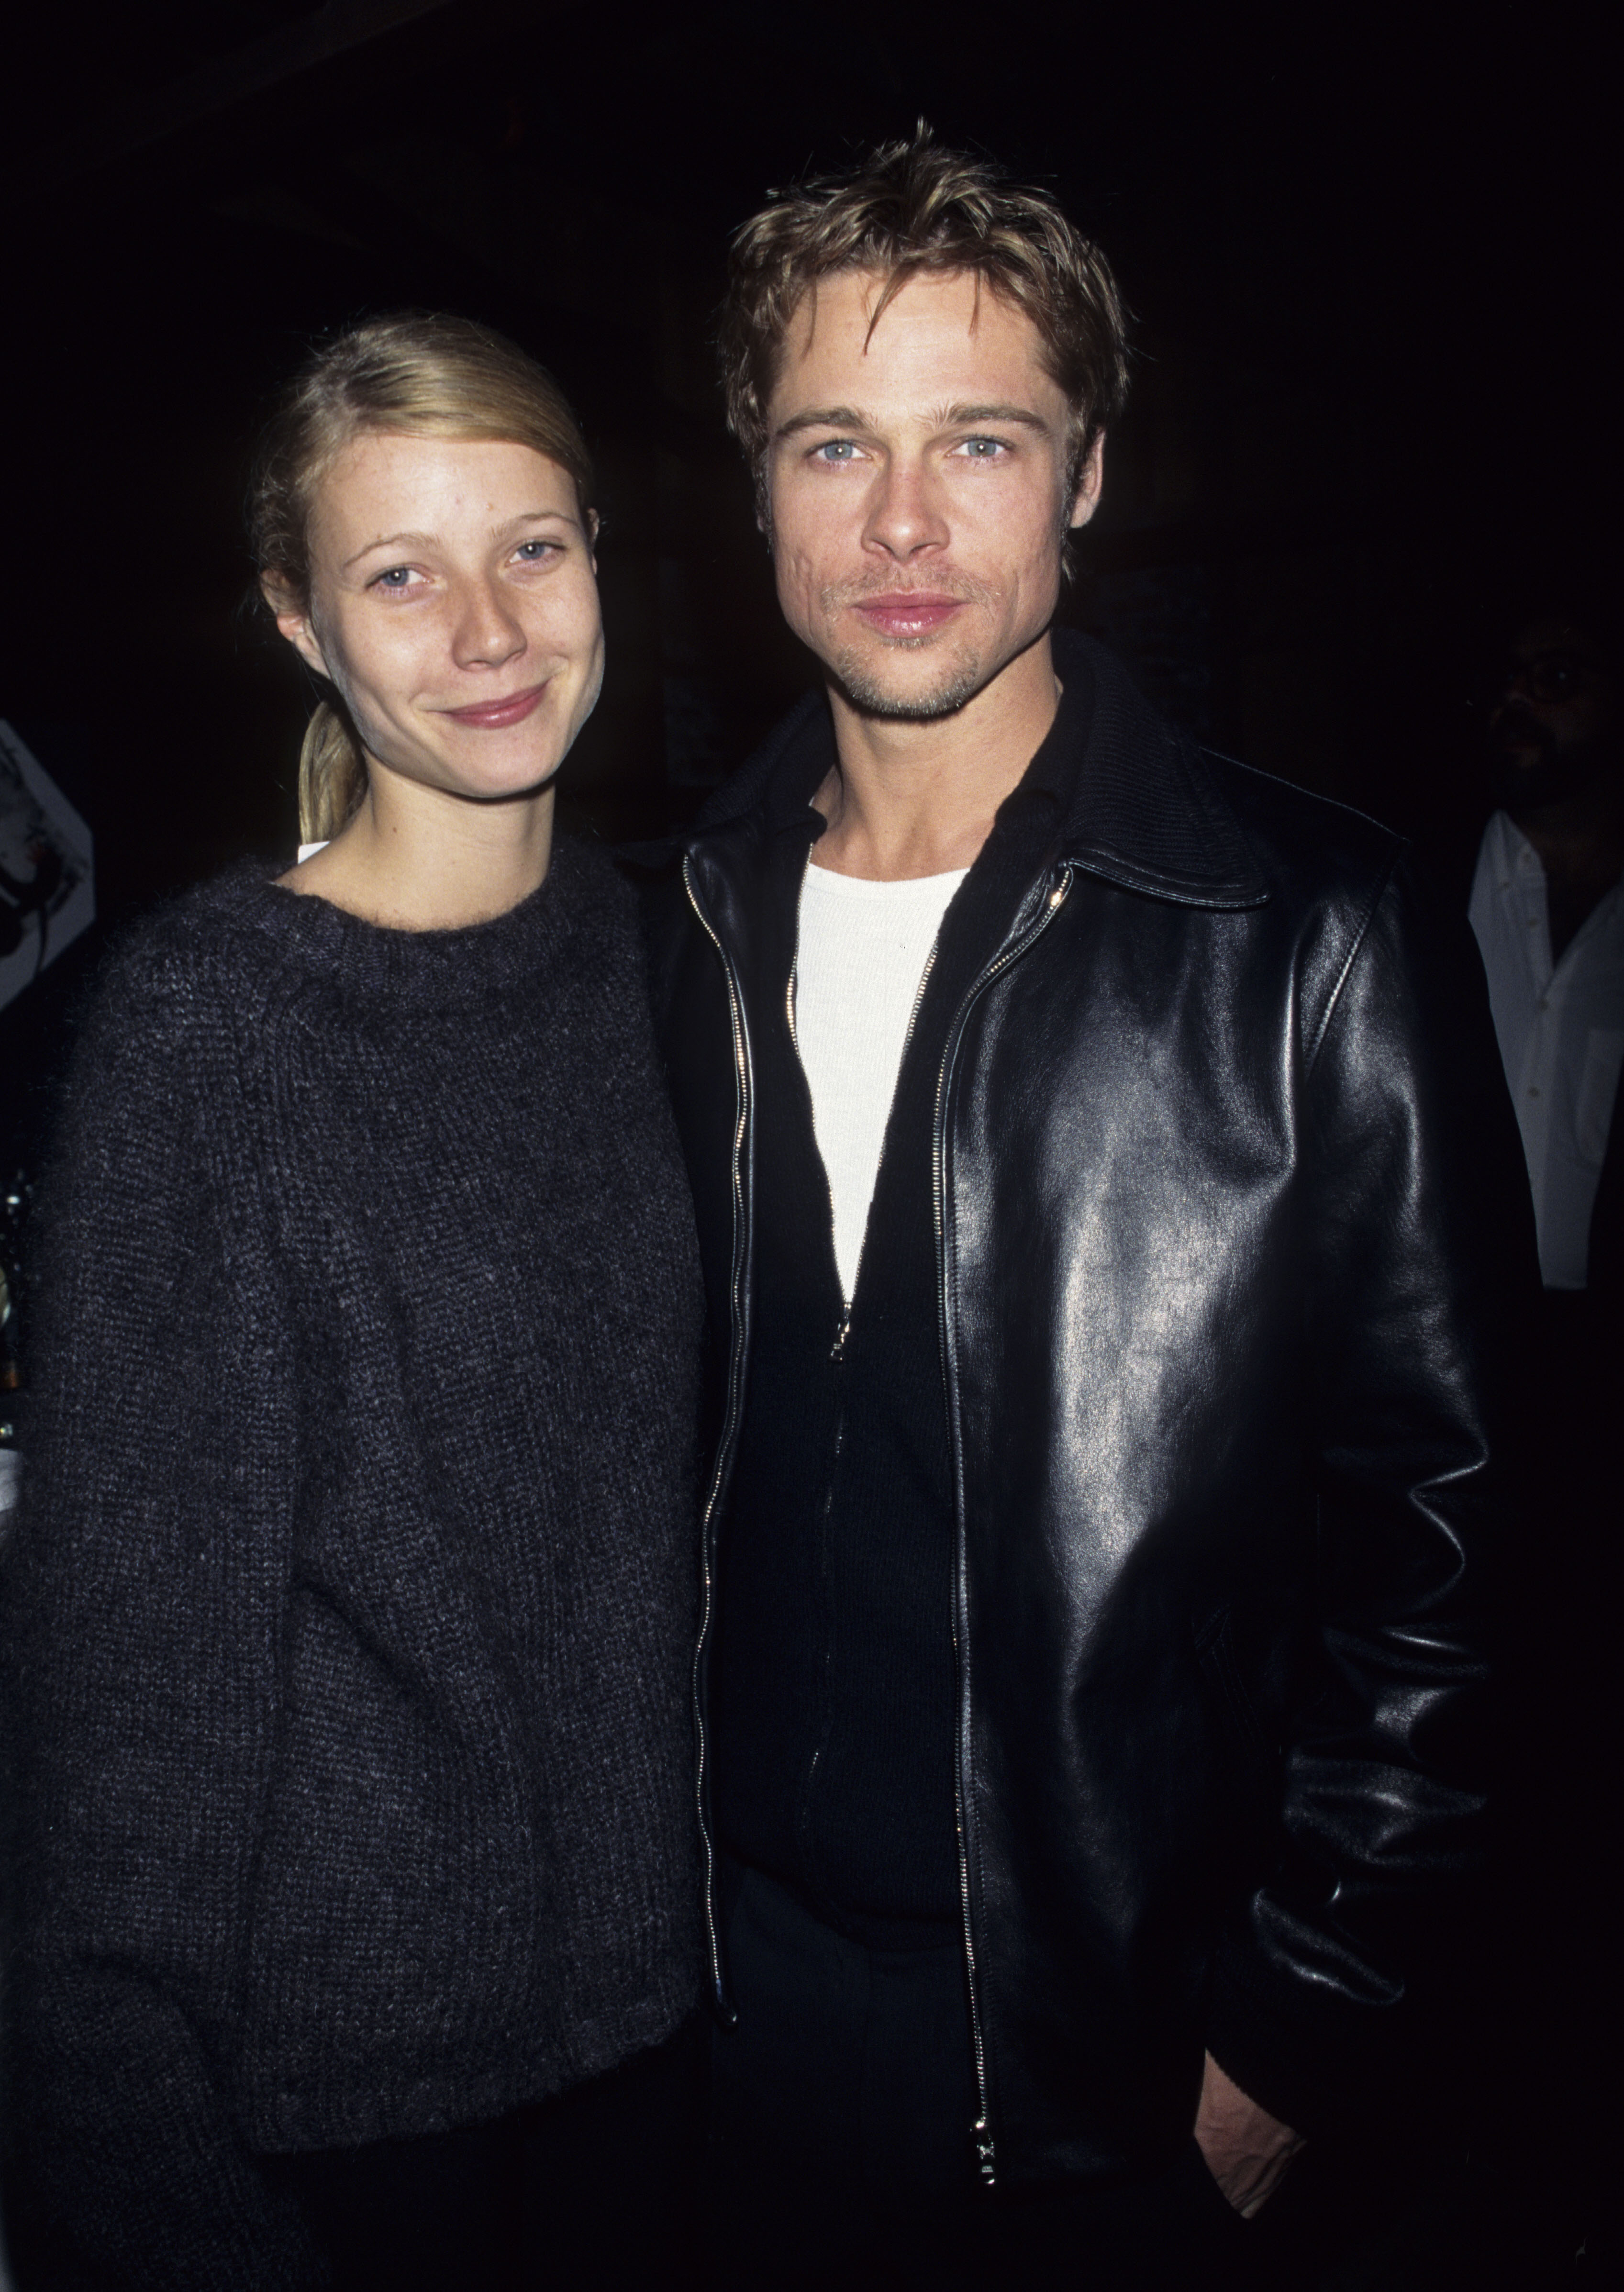 Gwyneth Paltrow and Brad Pitt at David Bowie's After Show Party in an undated photo | Source: Getty Images